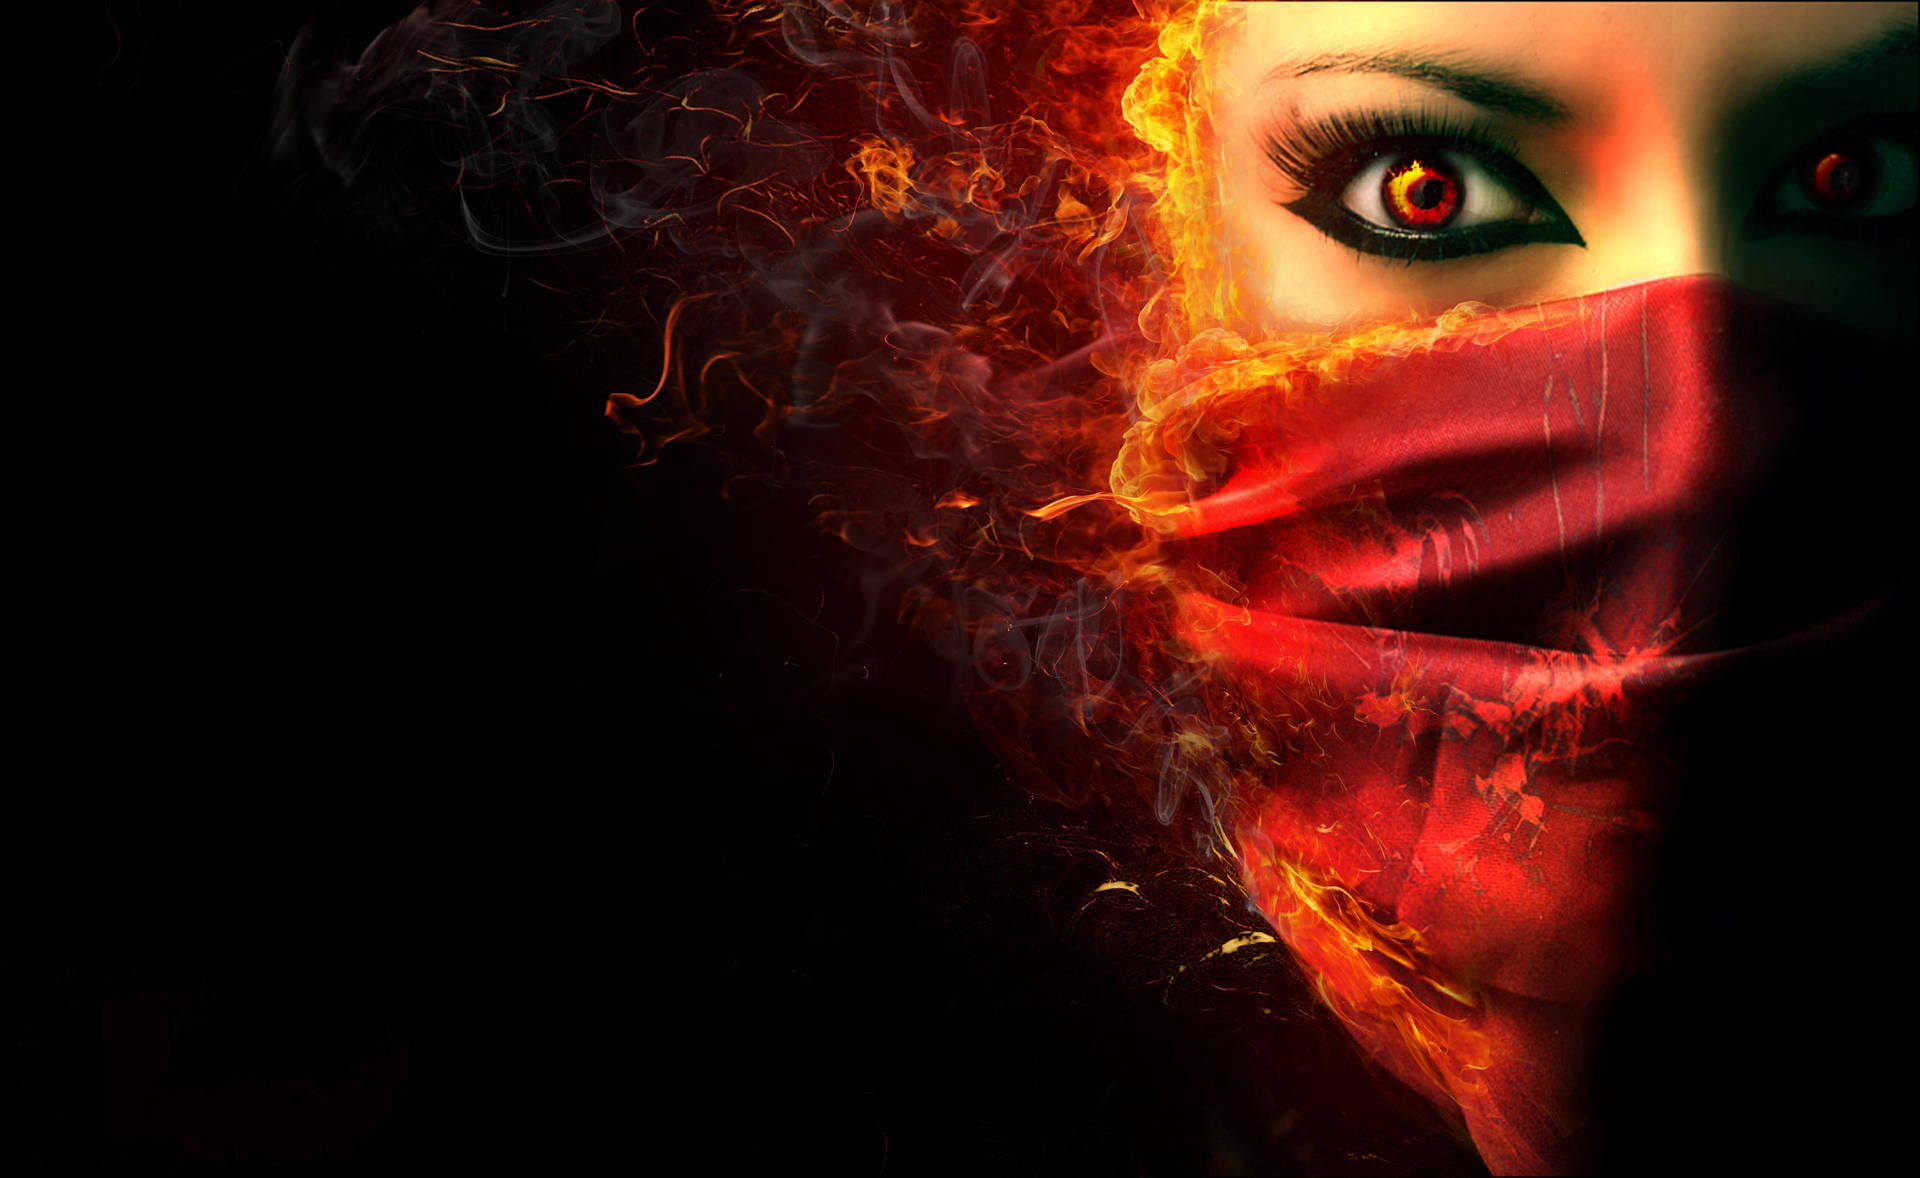 Eldfullkvinna Med Rött Slöja. (this Can Be A Potential Title For A Wallpaper Featuring A Fiery Woman Wearing A Red Veil Or Hijab.) Wallpaper